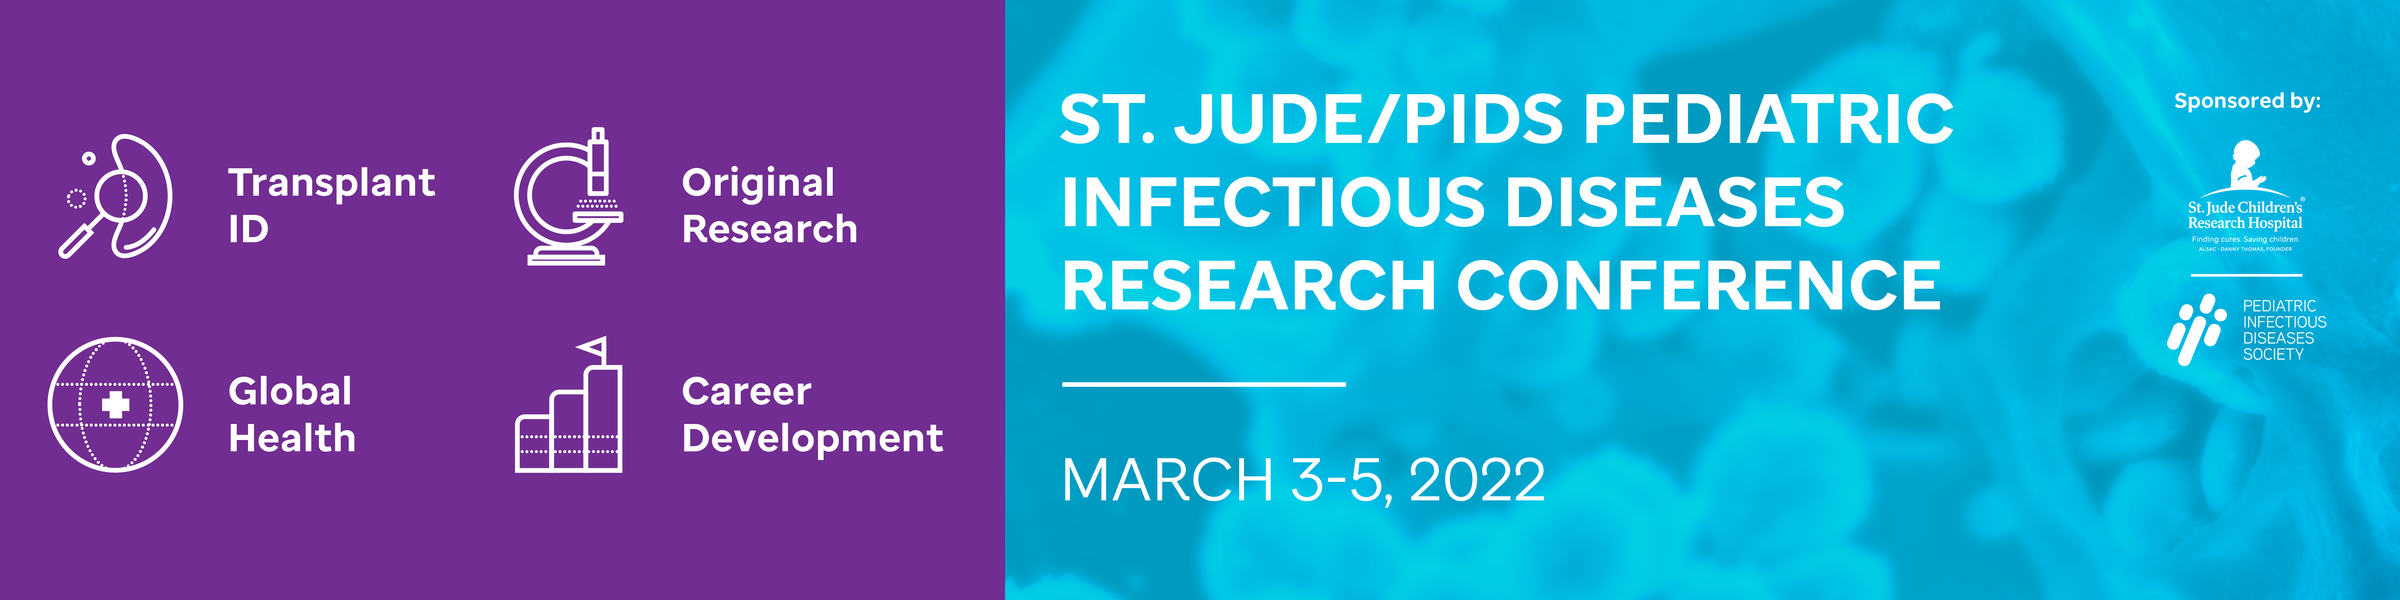 2022 St. Jude/PIDS Pediatric Infectious Diseases Research Conference